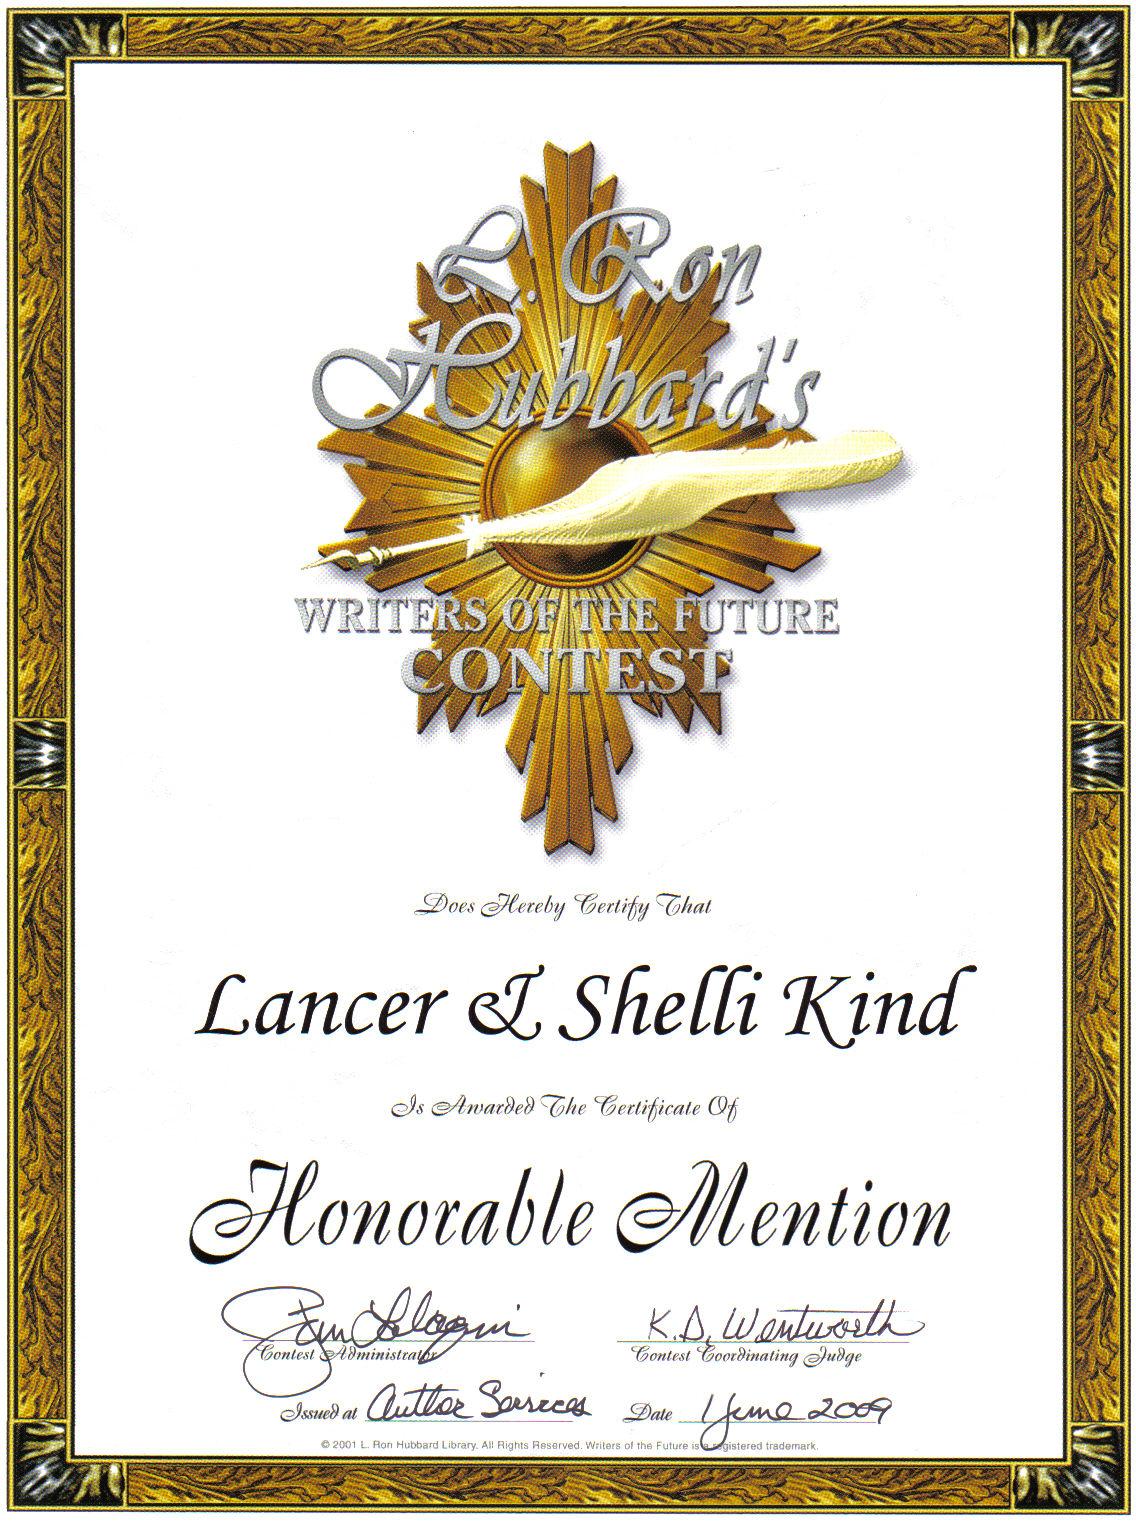 Honorable Mention And An Award For The Southern California Traction